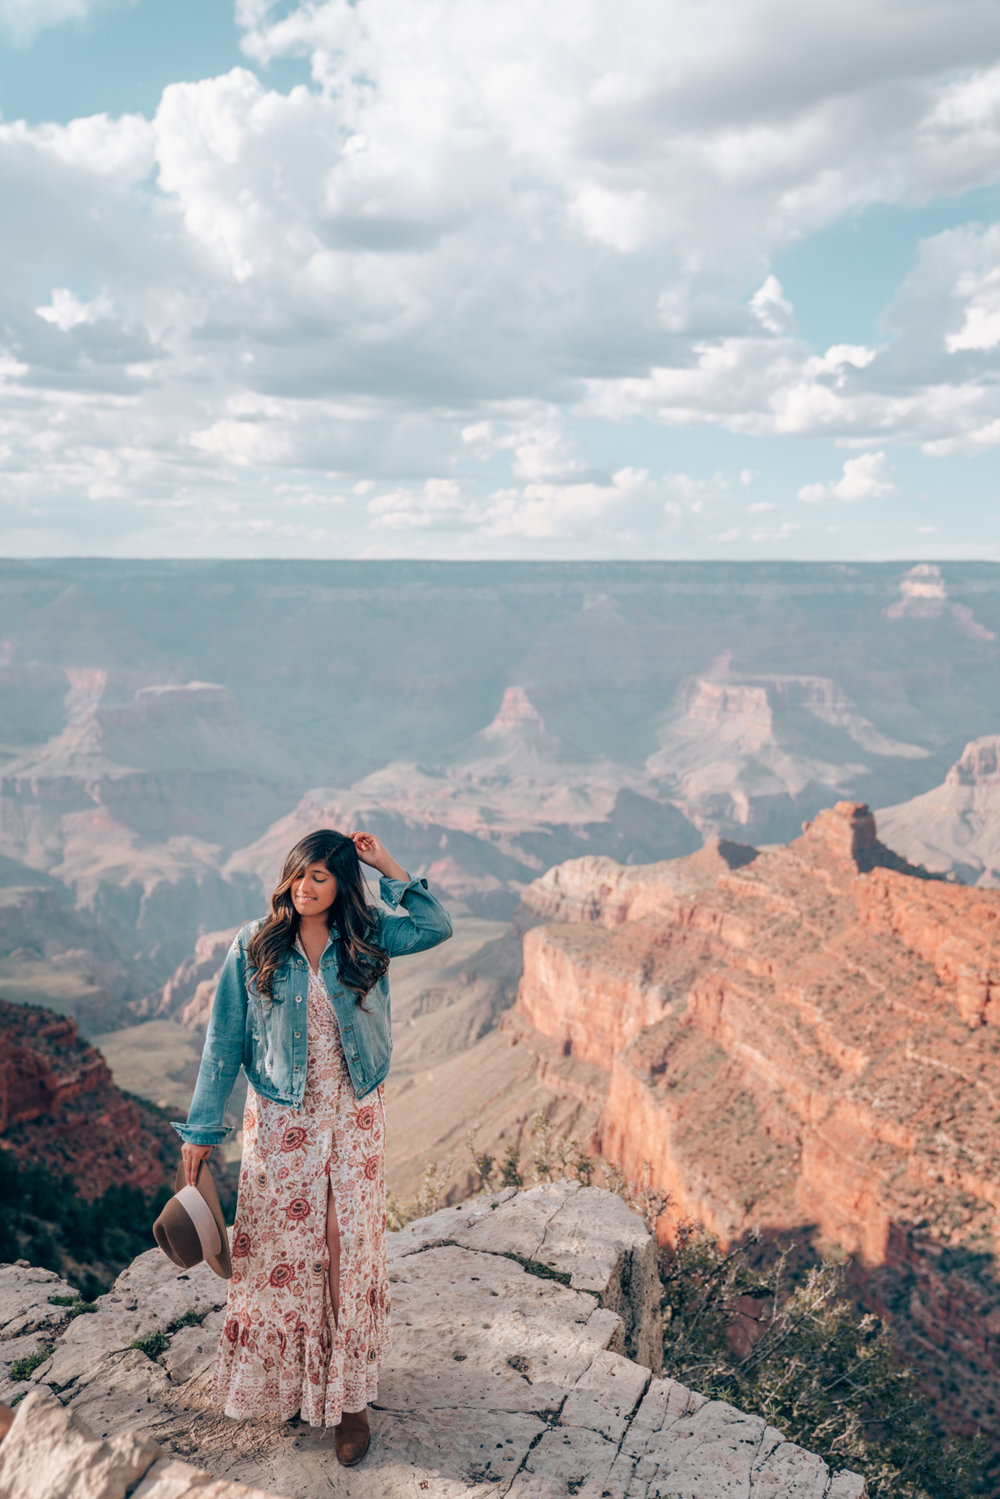 How to Spend a Weekend in Arizona: See Horseshoe Bend, Antelope Canyon and Grand Canyon